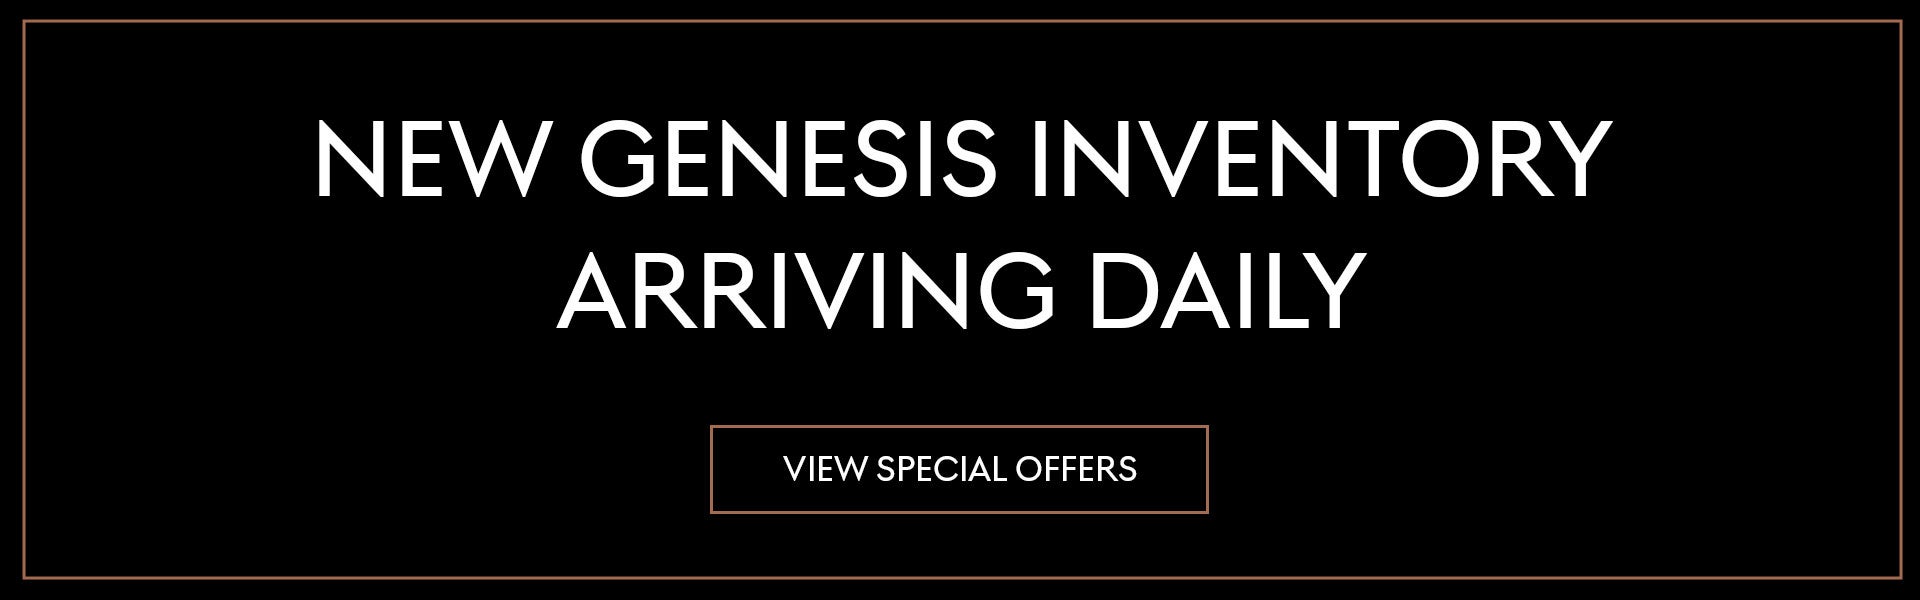 New Genesis Inventory Arriving Daily